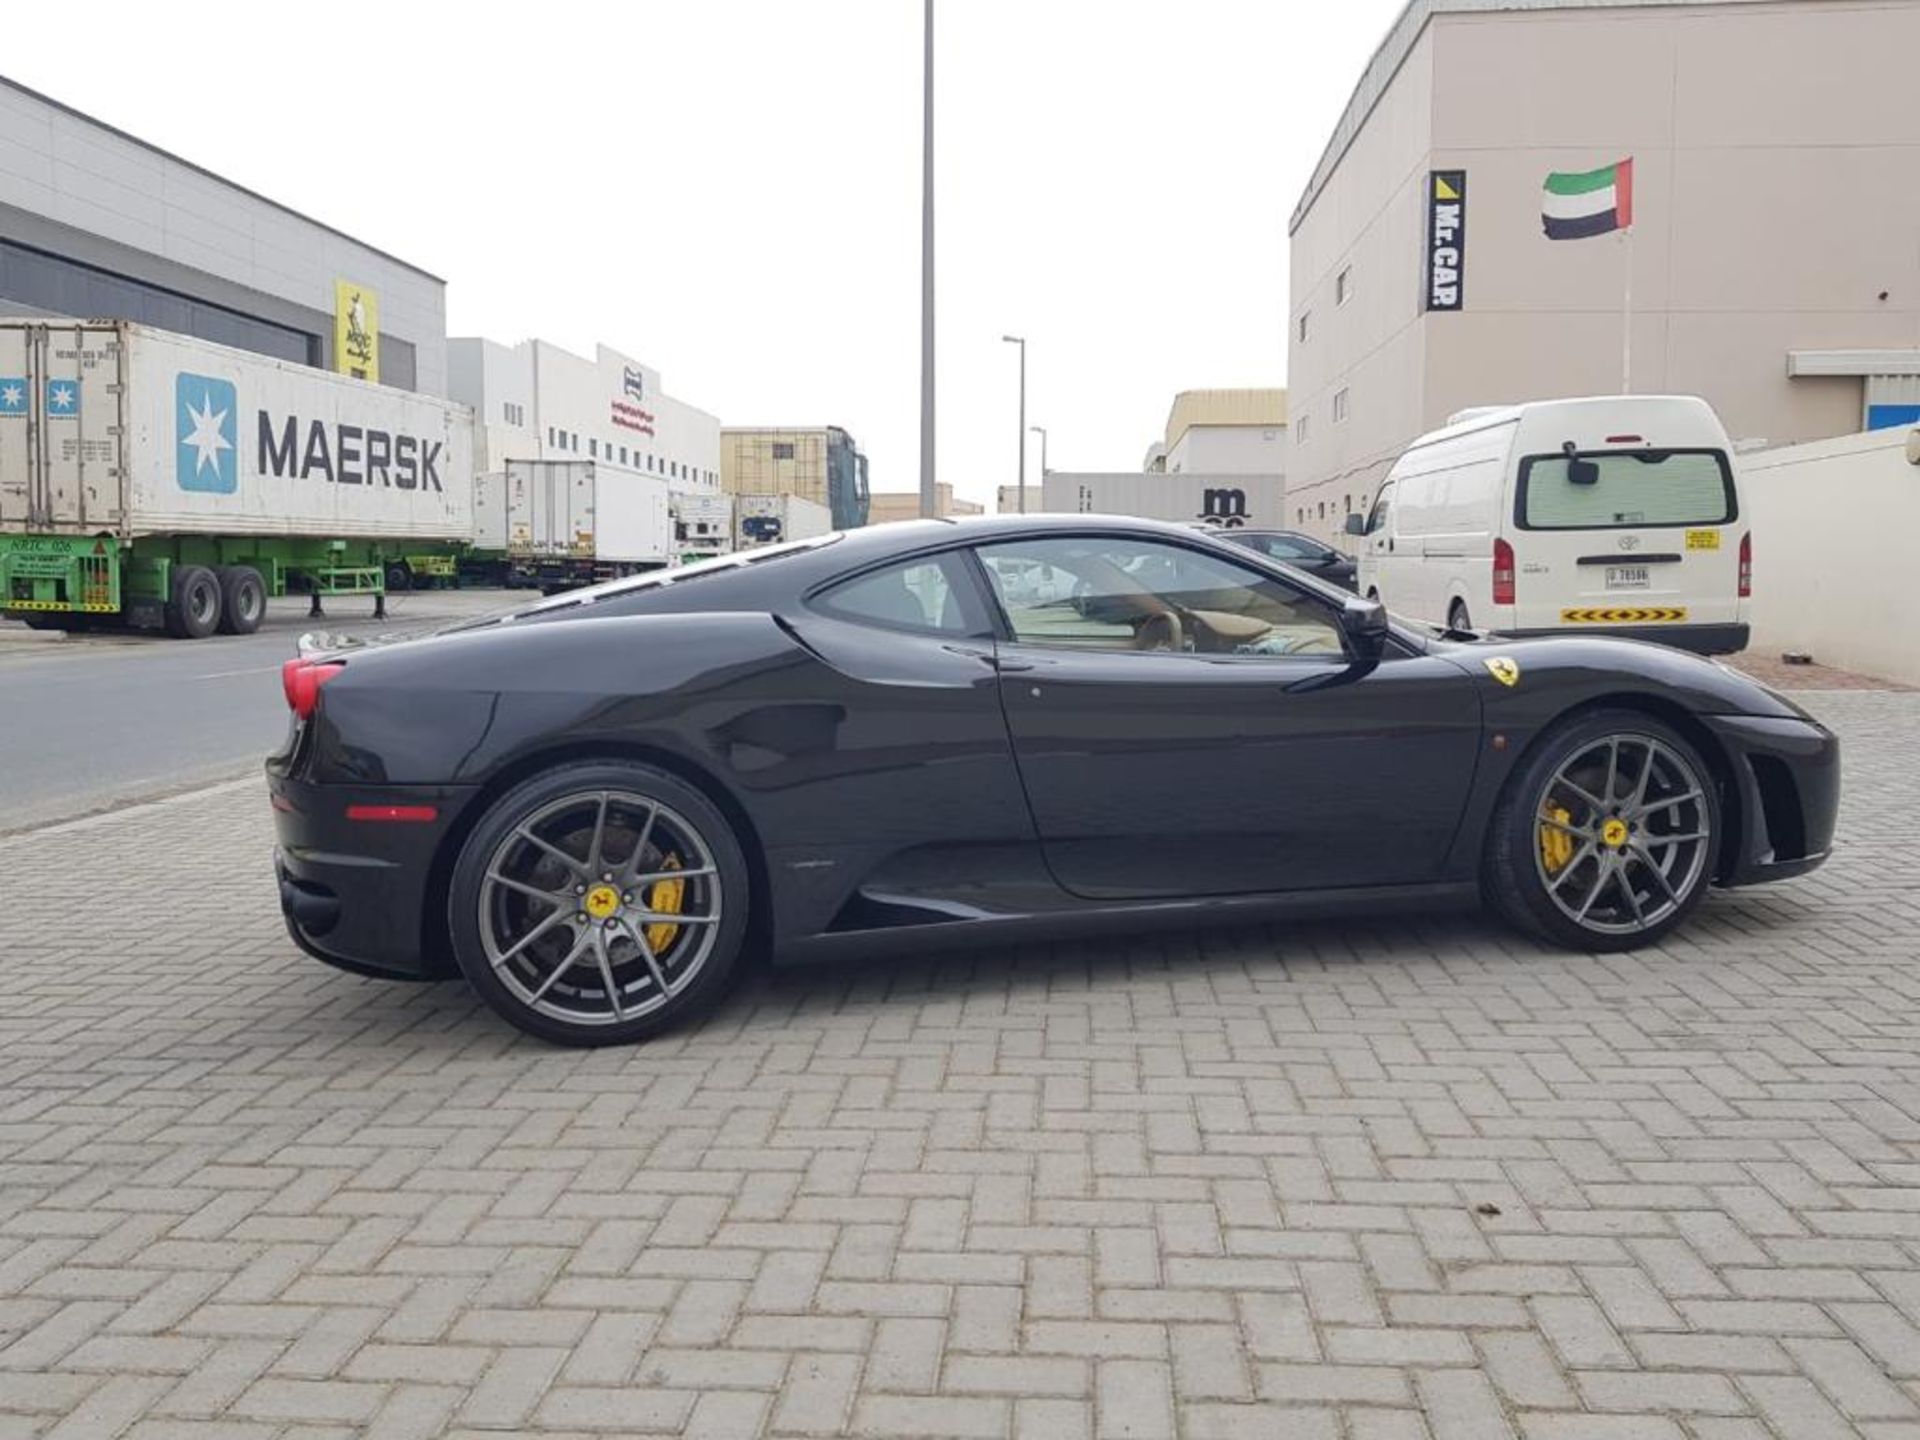 2007 FERRARI F430 BLACK 2 DOOR COUPE 4.3L AUTOMATIC LHD, PERFECT CONDITION INSIDE AND OUT - Image 9 of 13